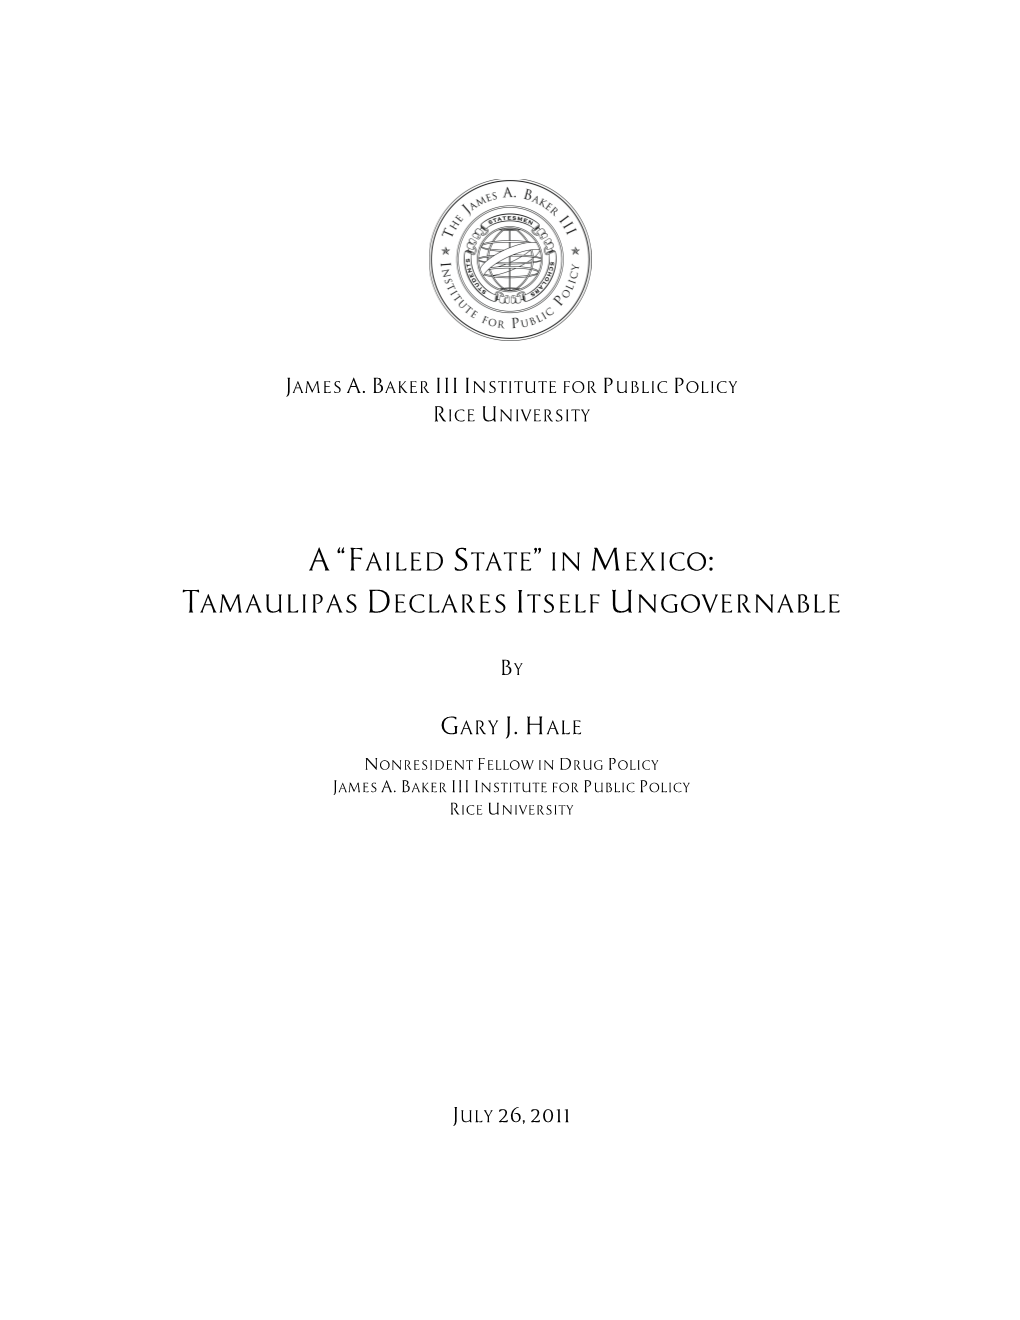 A “Failed State” in Mexico: Tamaulipas Declares Itself Ungovernable